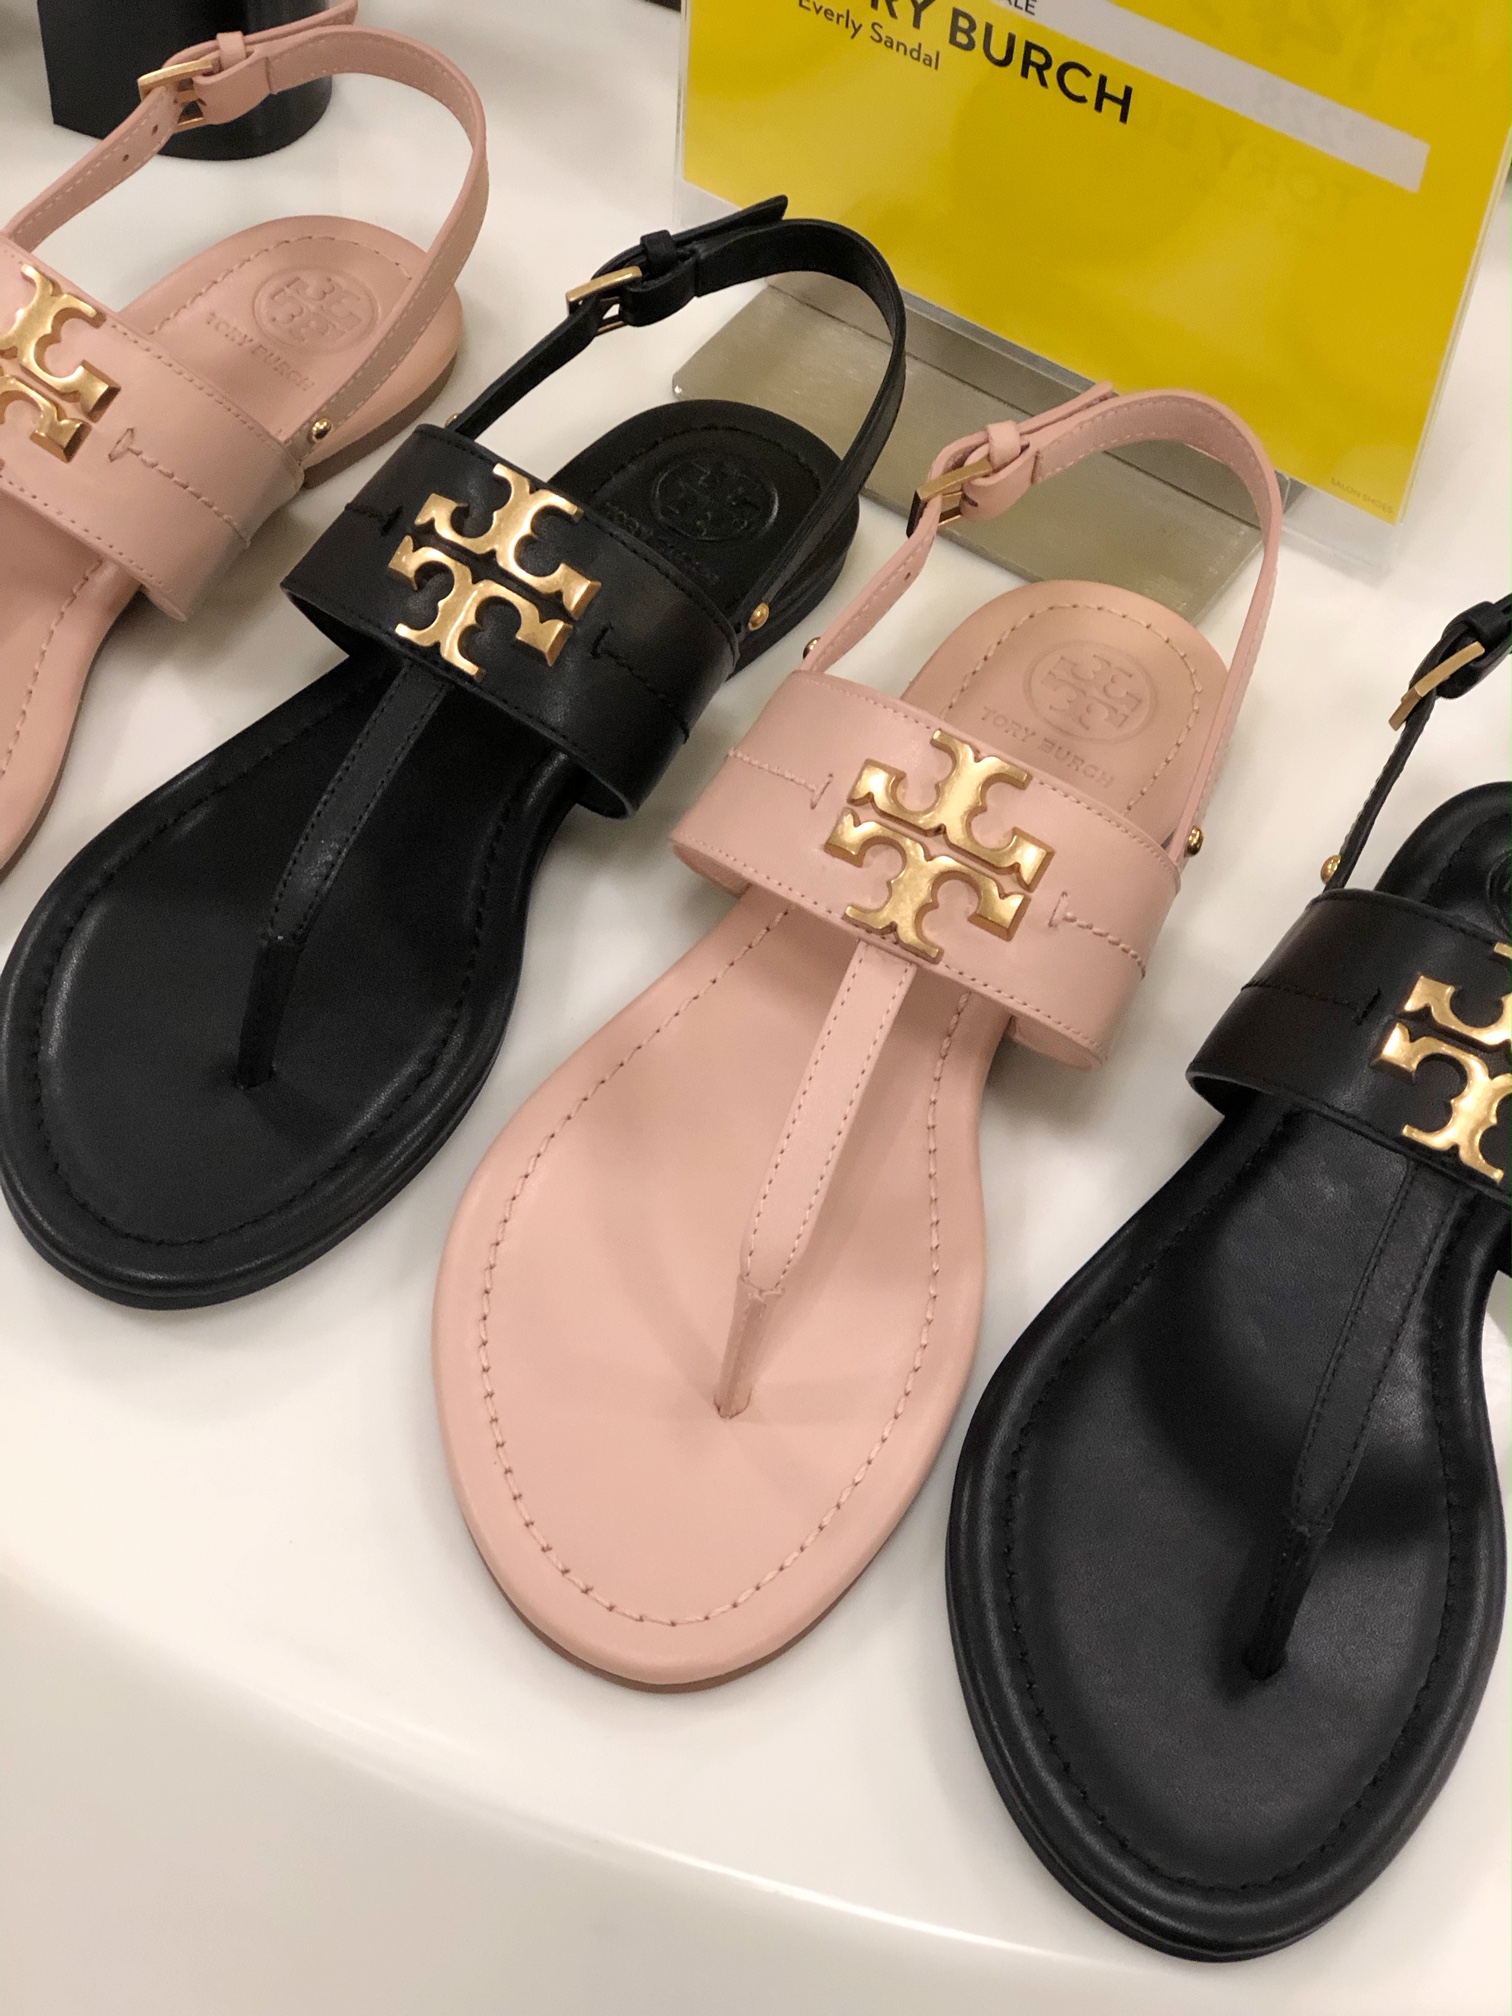 Tory burch Everly sandals Nsale 2019 